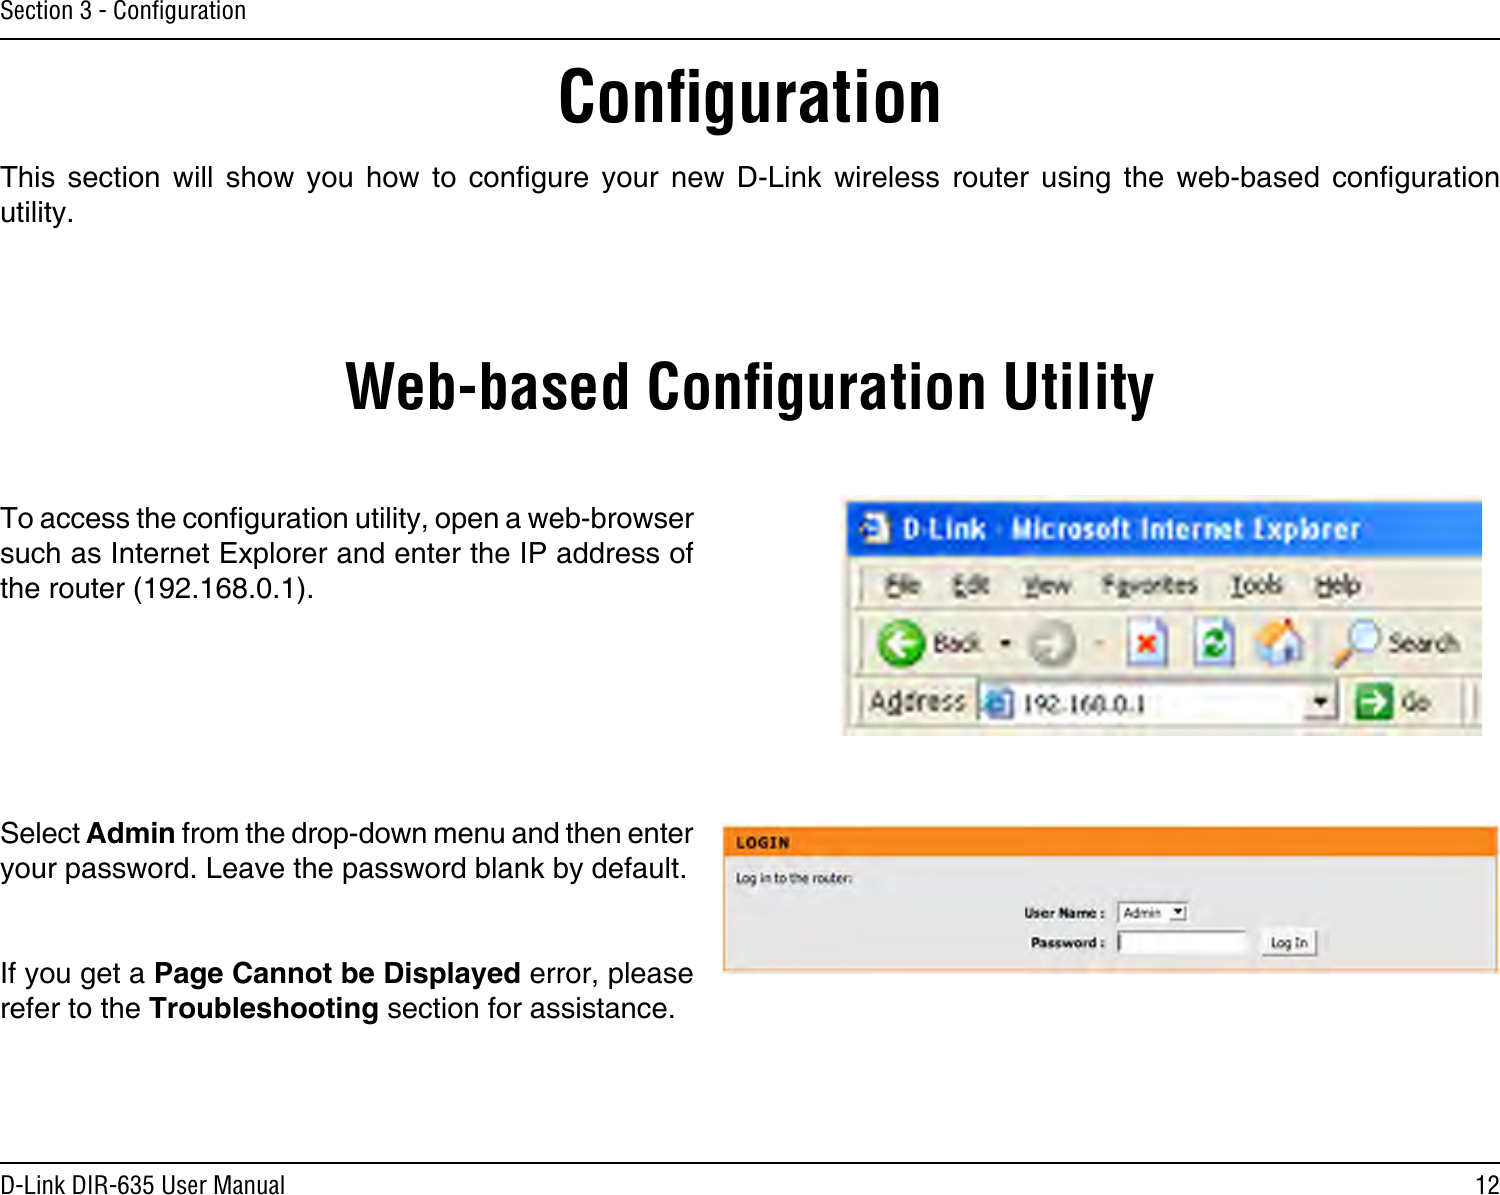 12D-Link DIR-635 User ManualSection 3 - ConﬁgurationConﬁgurationThis  section  will  show  you  how  to  congure  your  new  D-Link  wireless  router  using  the  web-based  conguration utility.Web-based Conﬁguration UtilityTo access the conguration utility, open a web-browser such as Internet Explorer and enter the IP address of the router (192.168.0.1).Select Admin from the drop-down menu and then enter your password. Leave the password blank by default.If you get a Page Cannot be Displayed error, please refer to the Troubleshooting section for assistance.